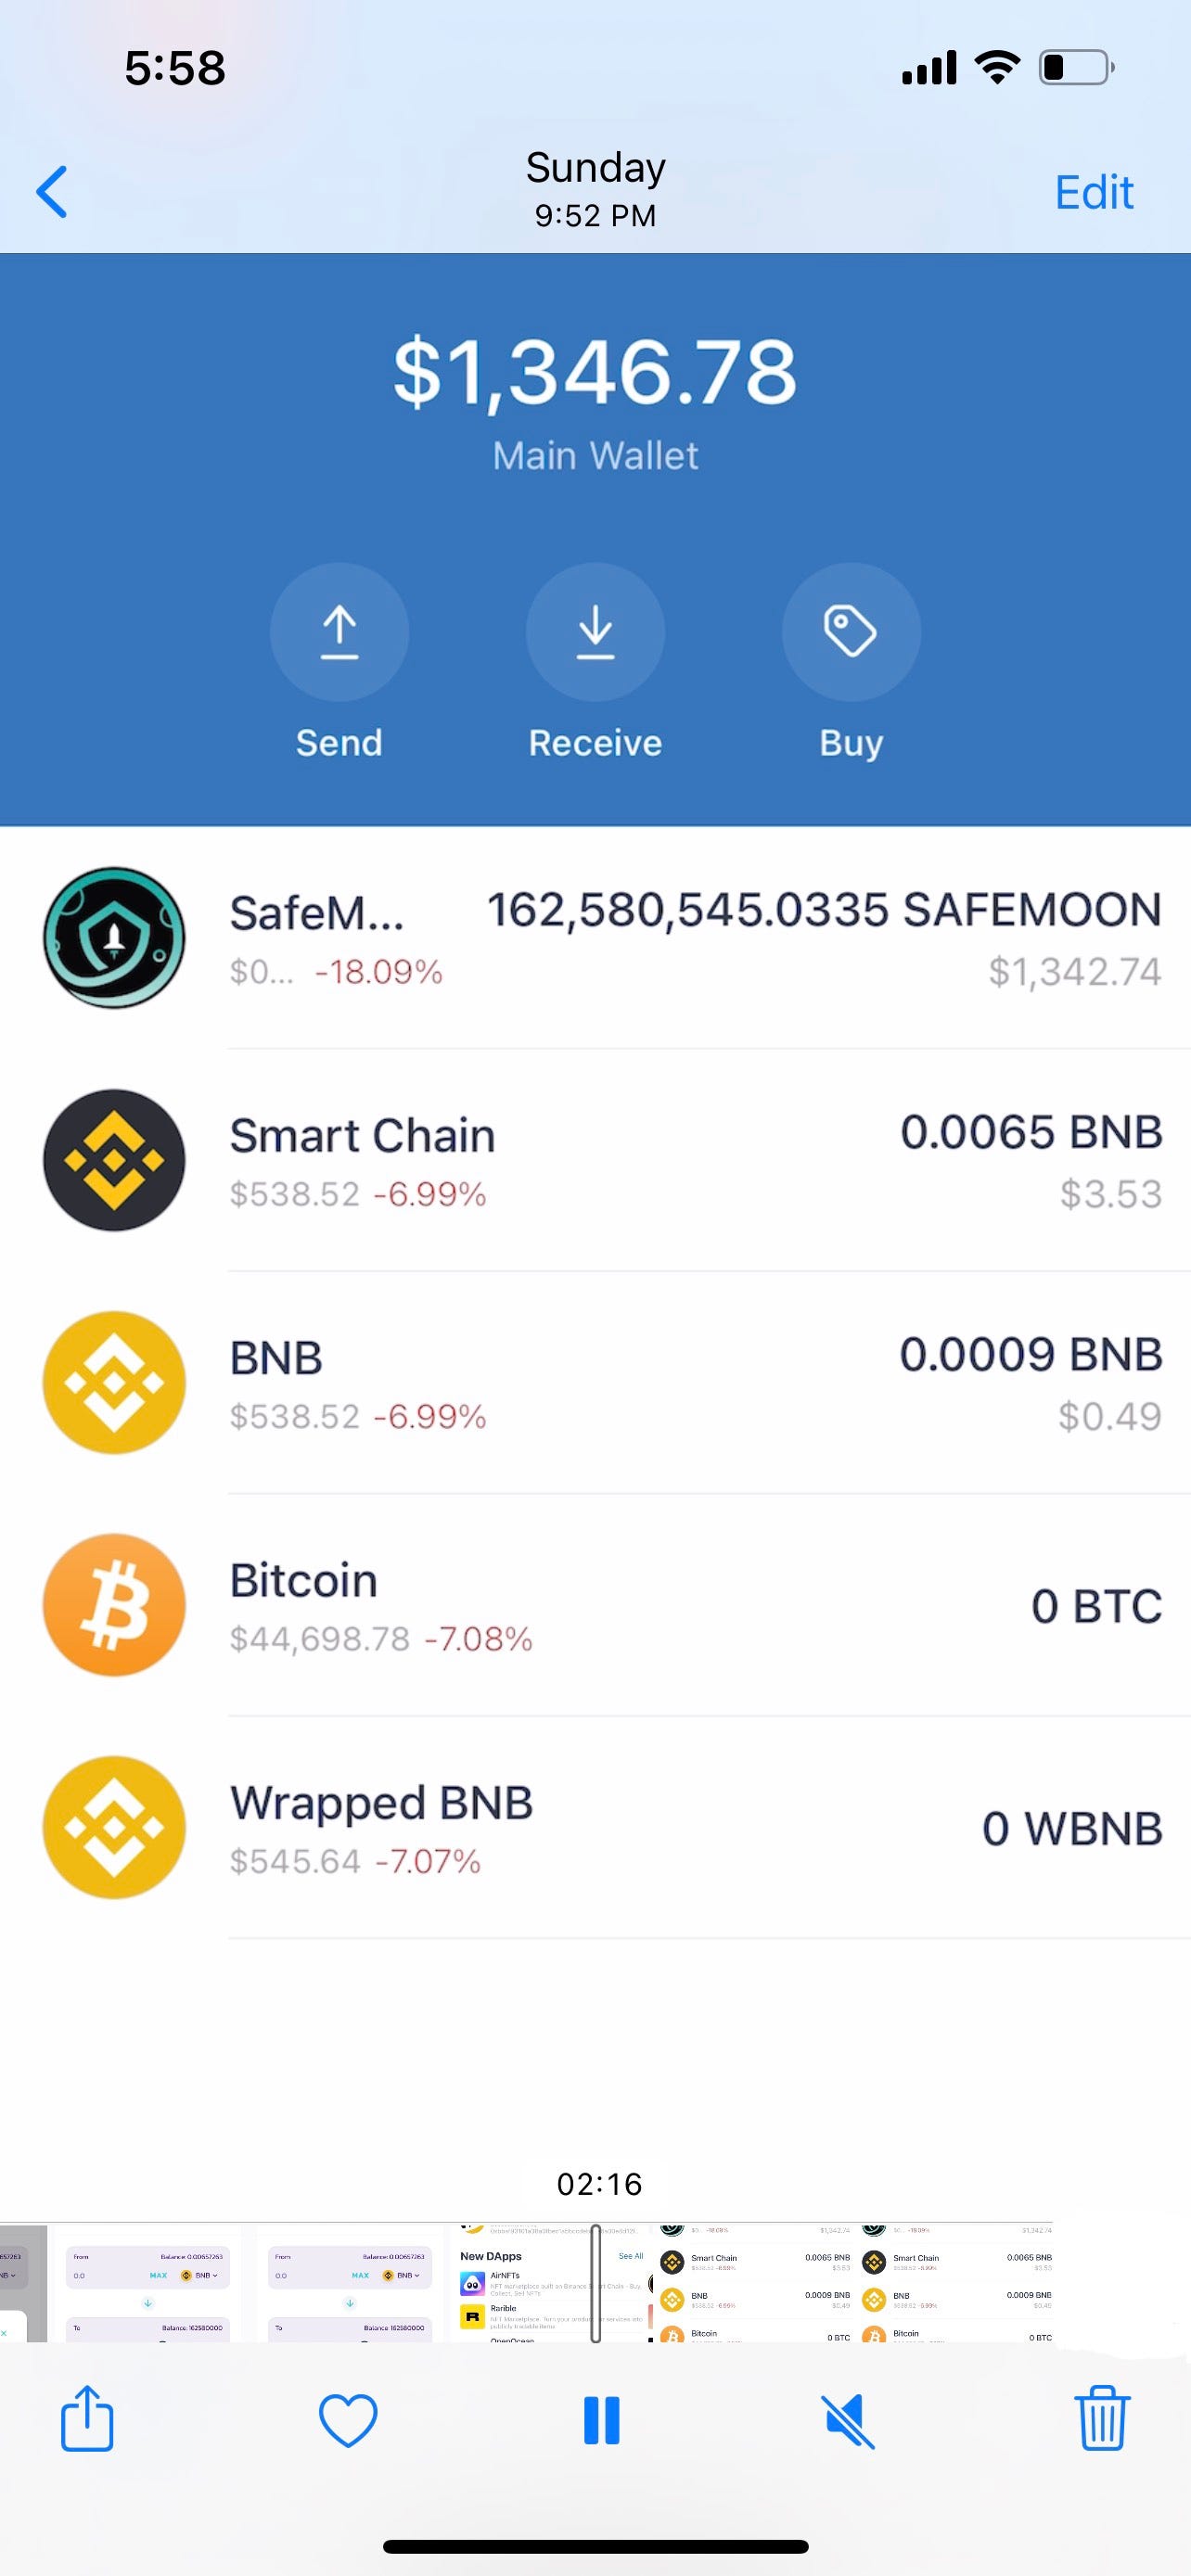 Is The Safemoon Crypto A Good Investment? - Safemoon ...